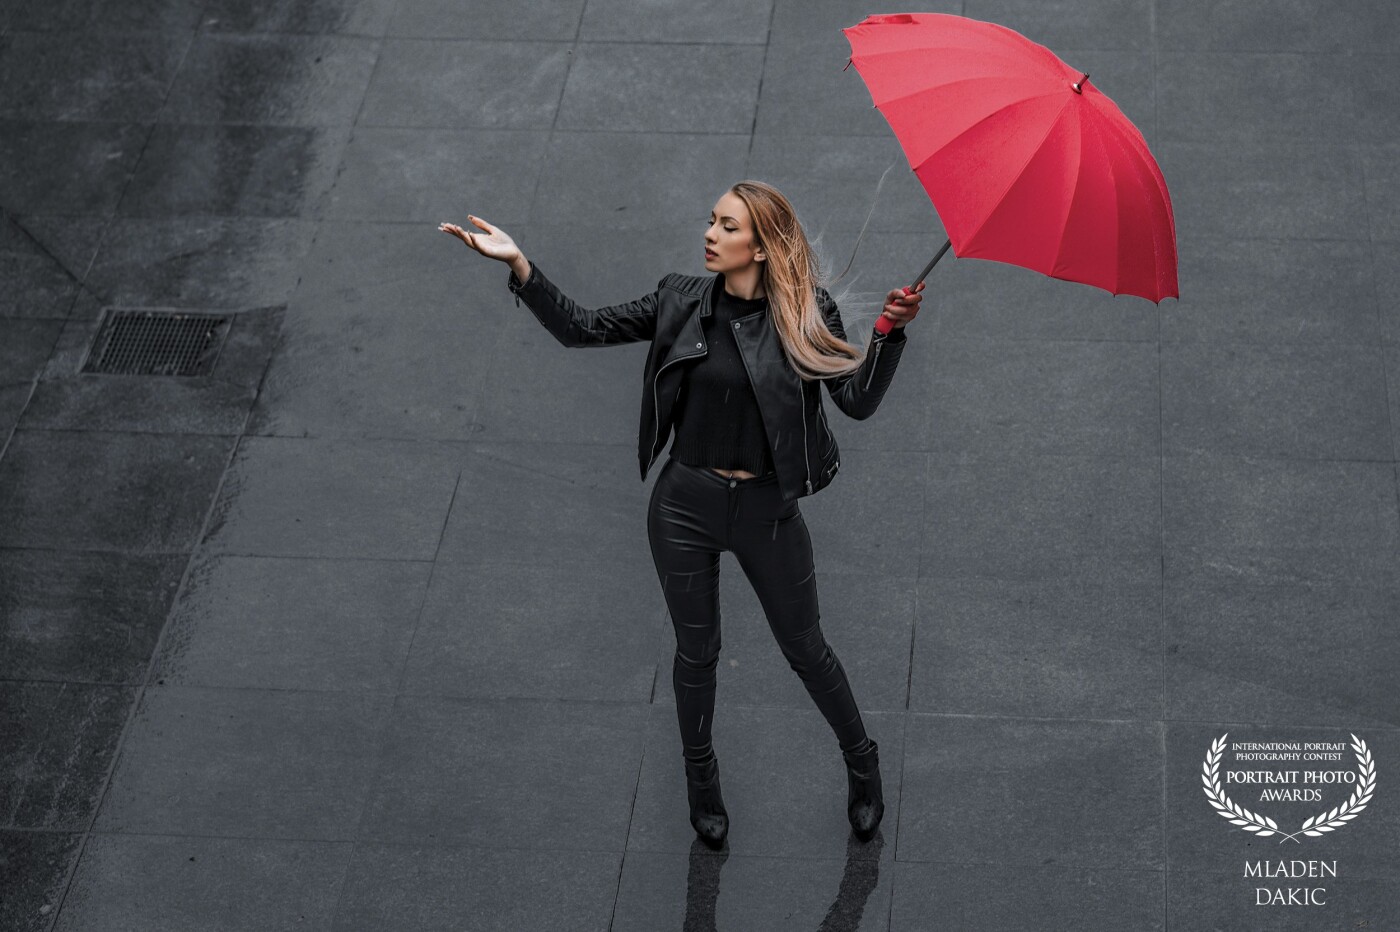 This is a picture from my first photo shoot with Tanja (and it wasn't the last ;-) We had the idea to do some cool city fashion shoots in black leather. The day came and so did the rain. So we took some great shots in the rain.<br />
<br />
I shot her from a higher position. I love the color contrast from the deep black of her leather suit, the gray floor and the red umbrella. I titled the picture "Is it still raining?".<br />
<br />
For this image I only used natural light.